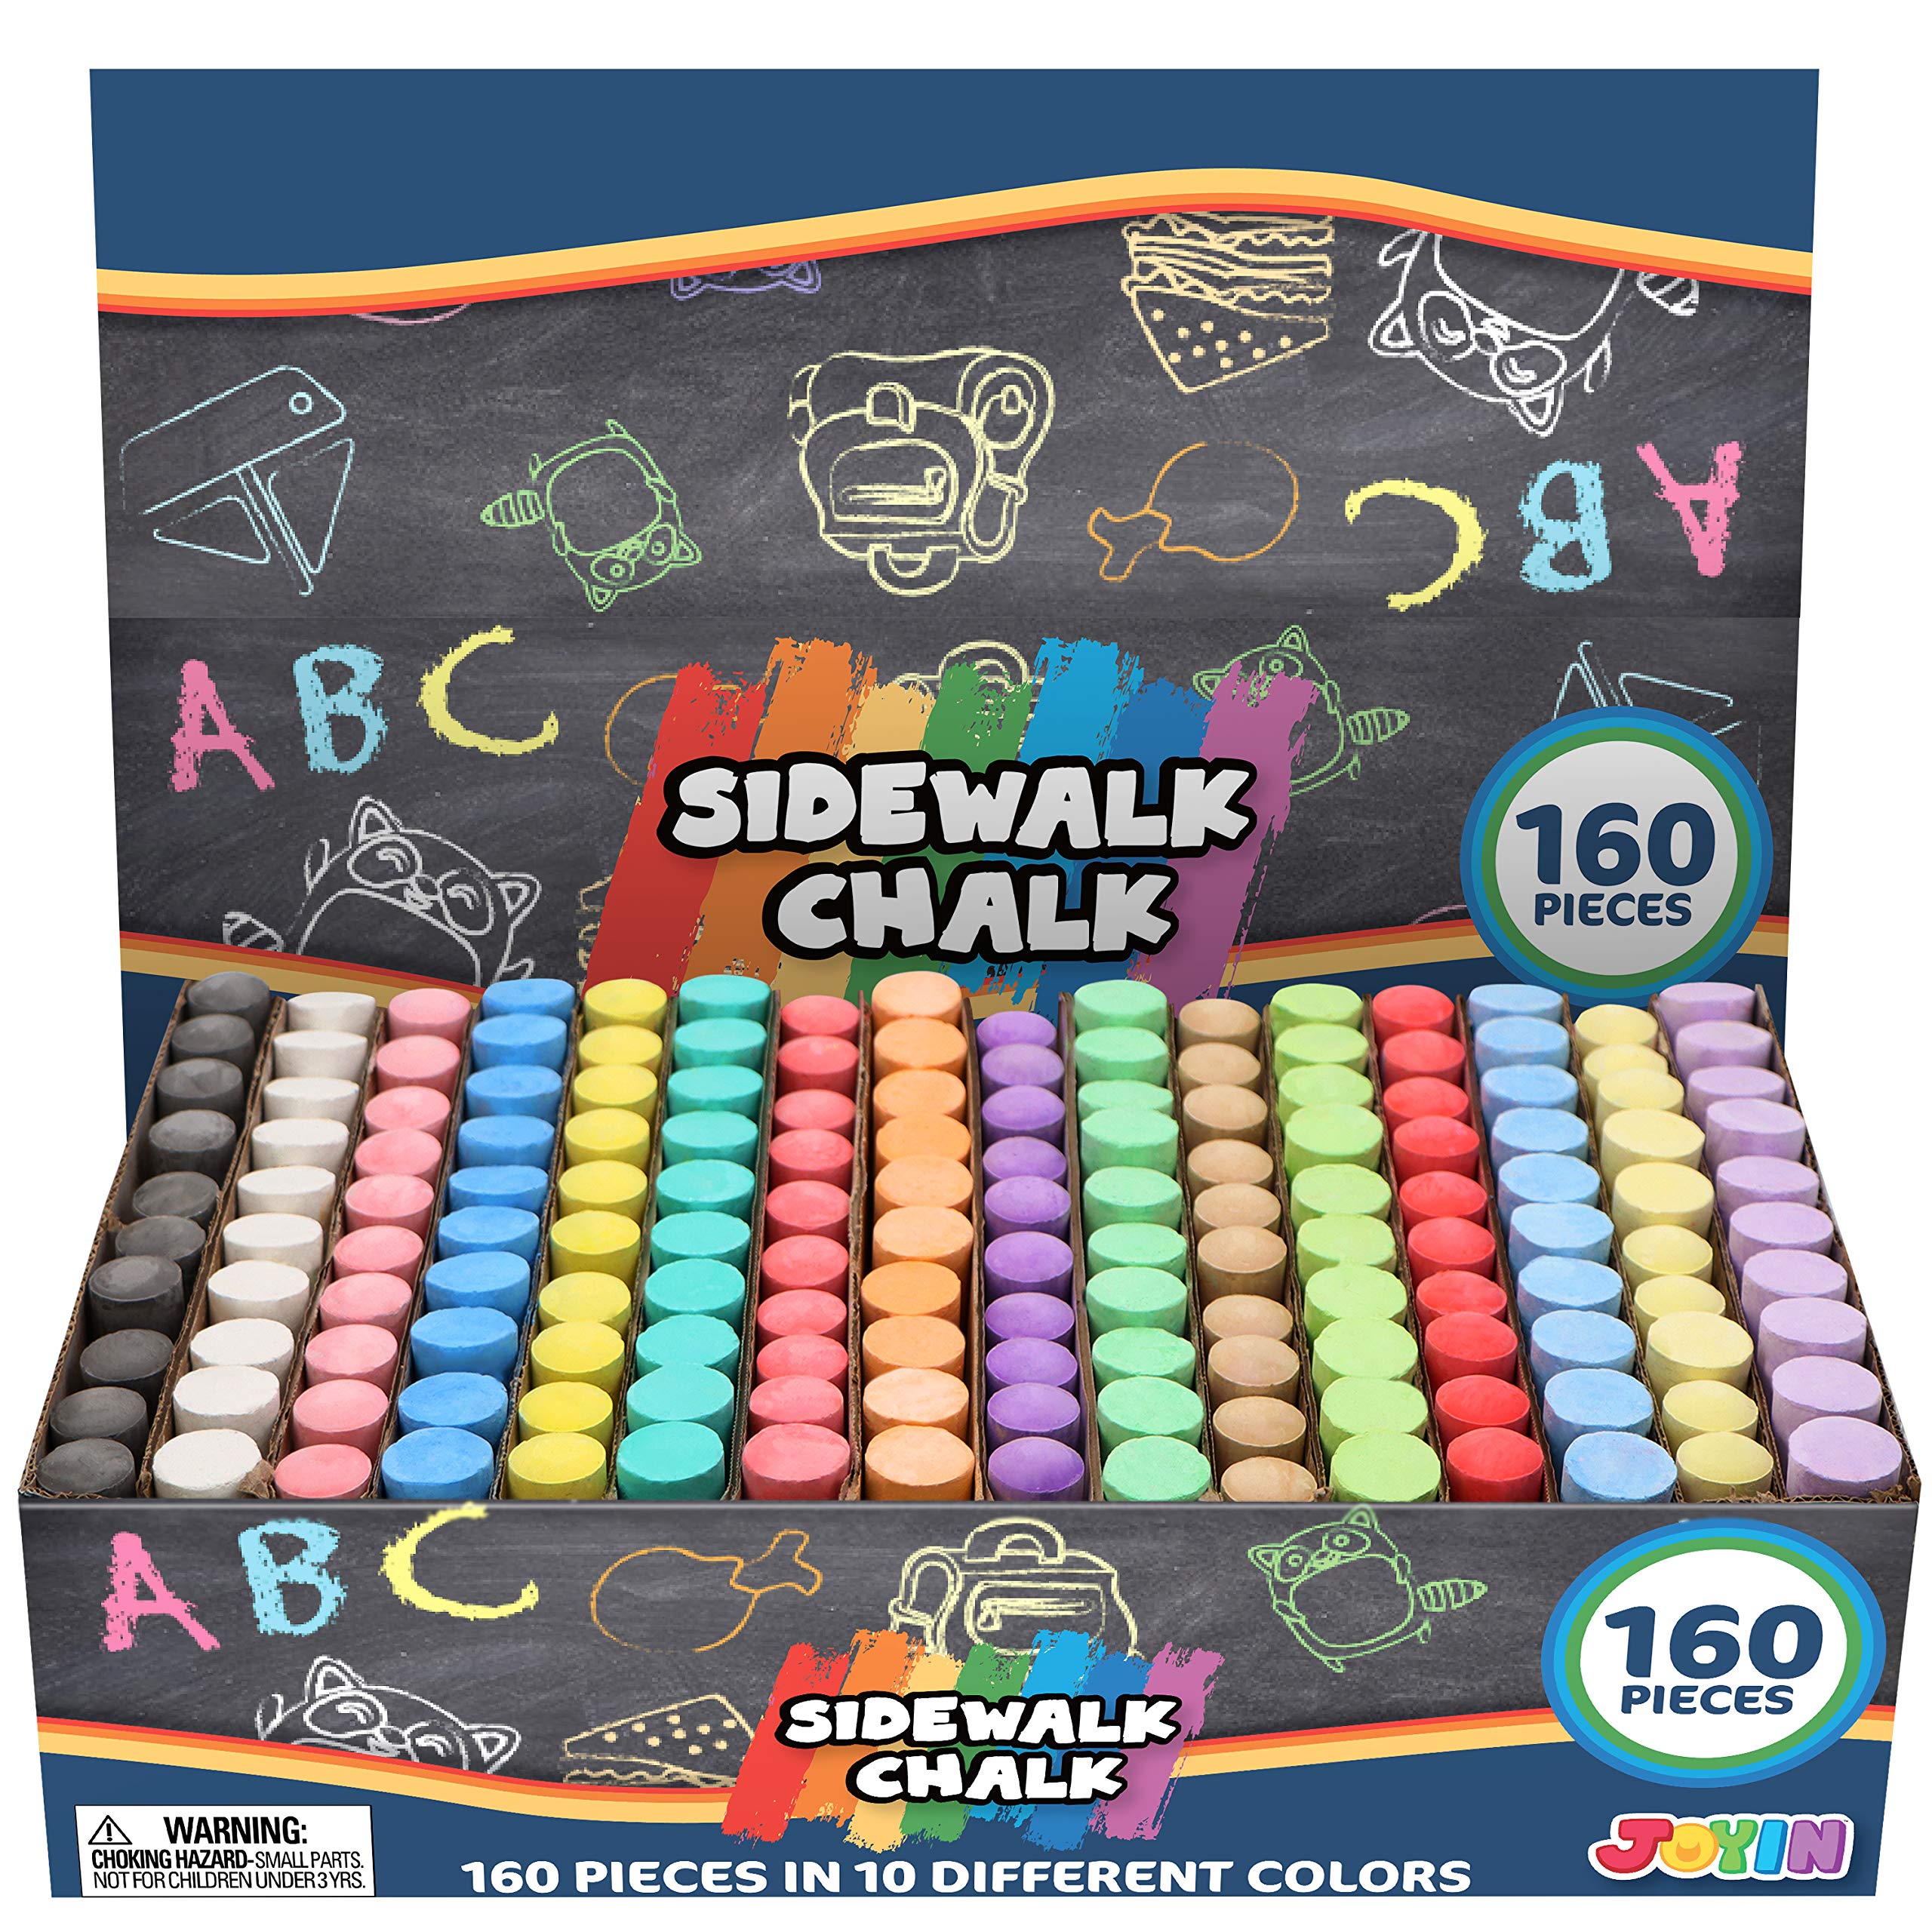 JOYIN 108 Pcs Sidewalk Chalk Set in 36 Count, 3 Assorted Colors, Non-Toxic Jumbo Washable Driveway Chalk for Outdoor Art Play, Great Gift Toys for